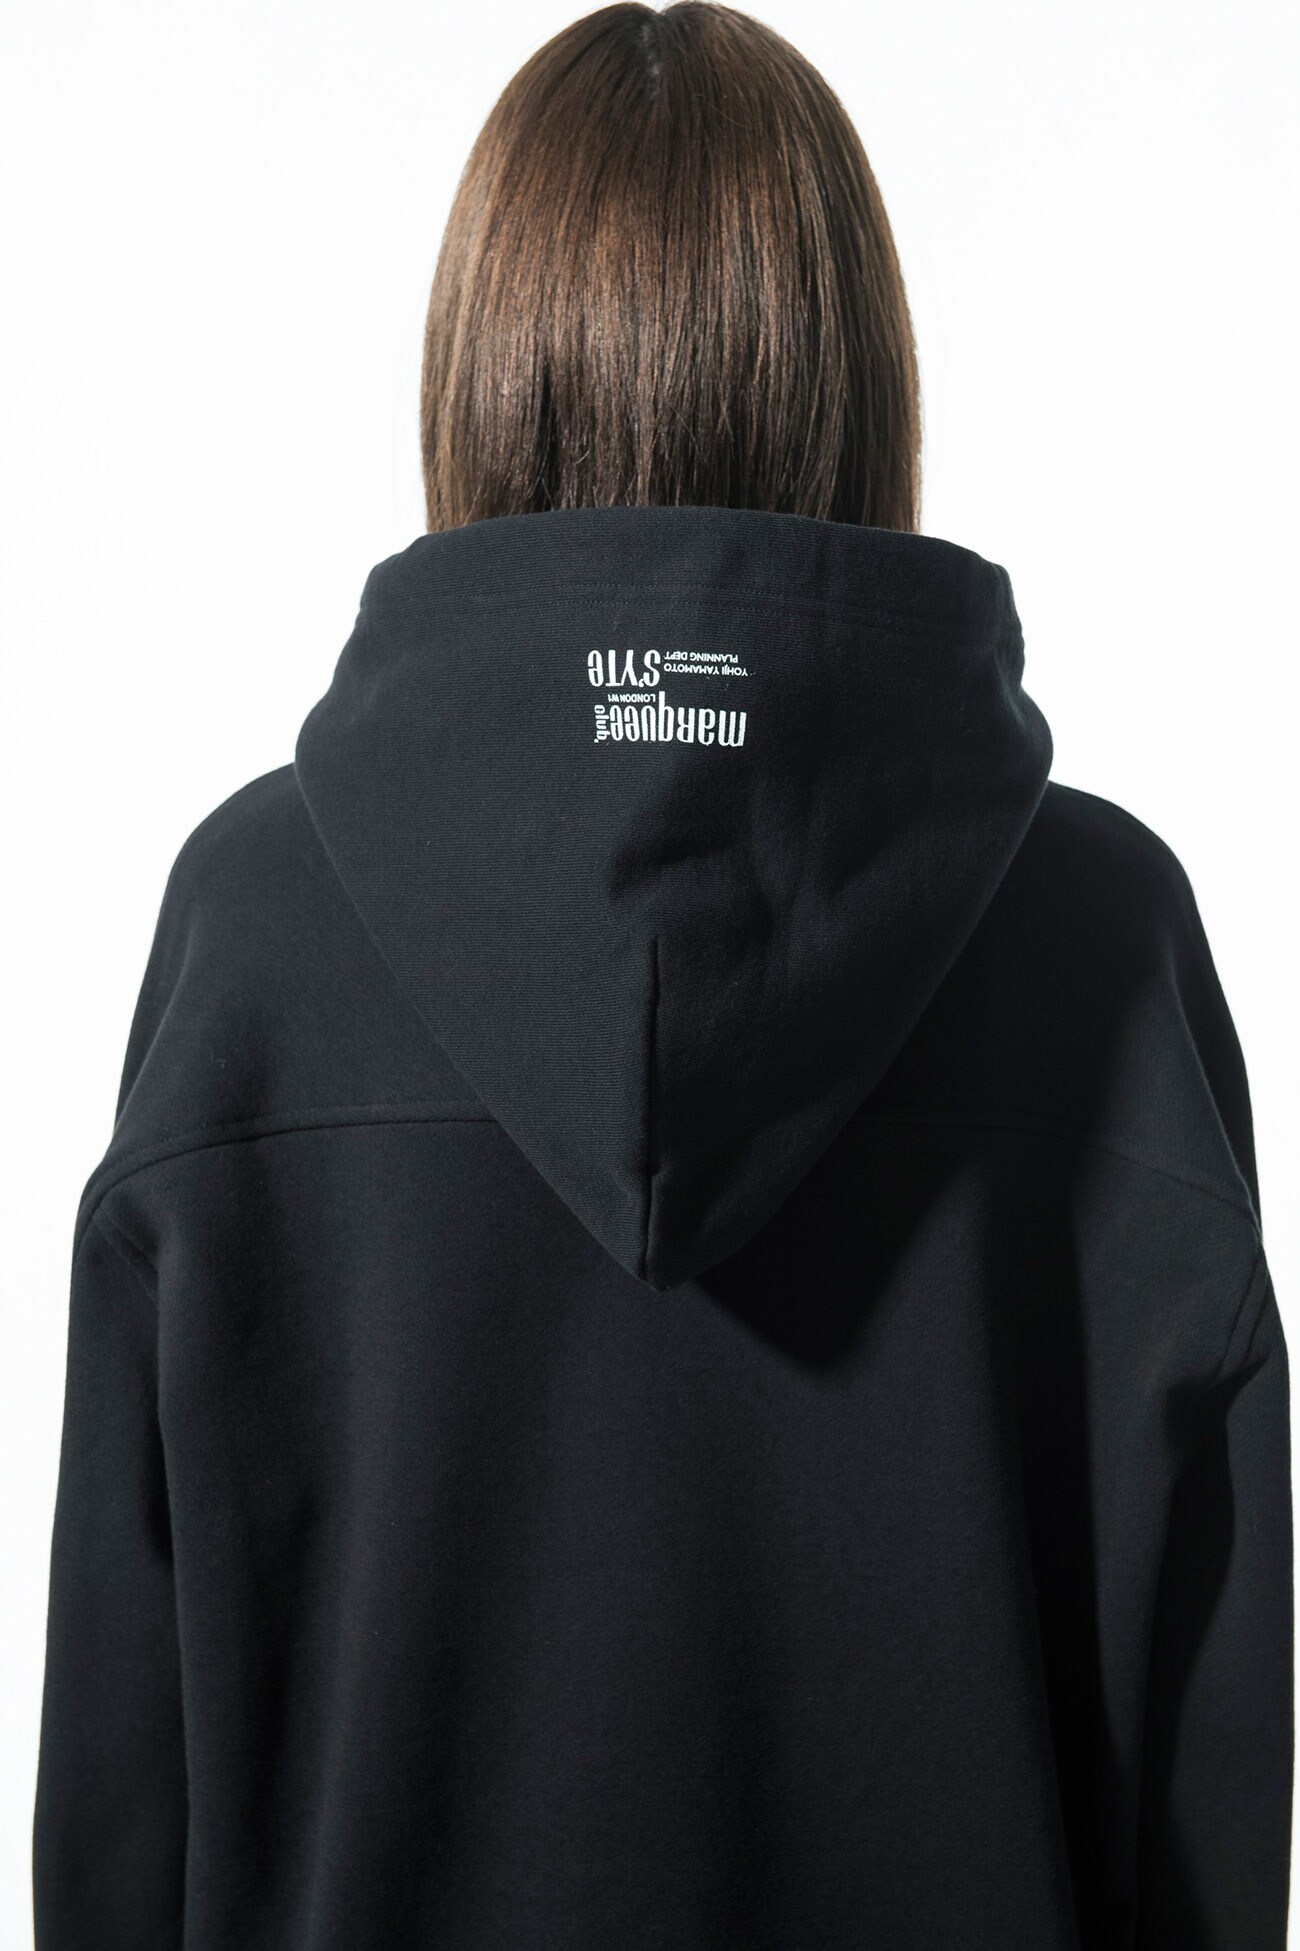 S’YTE × marquee club(R) French Terry Stitch Work Photograph Hoodie